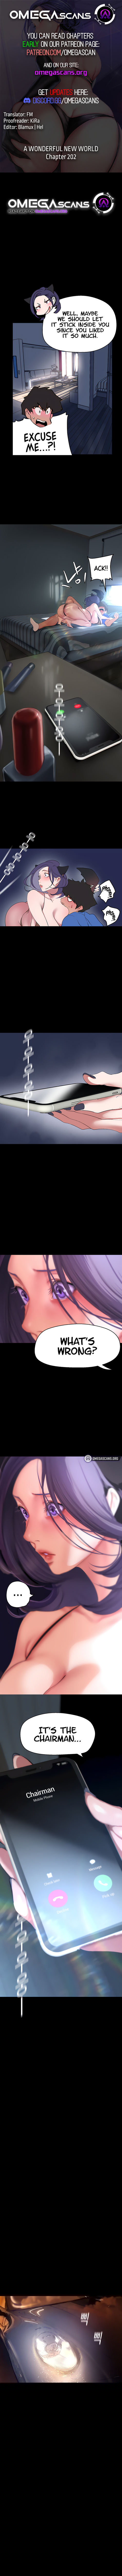 Panel Image 1 for chapter 202 of manhwa A Wonderful New World on read.oppai.stream